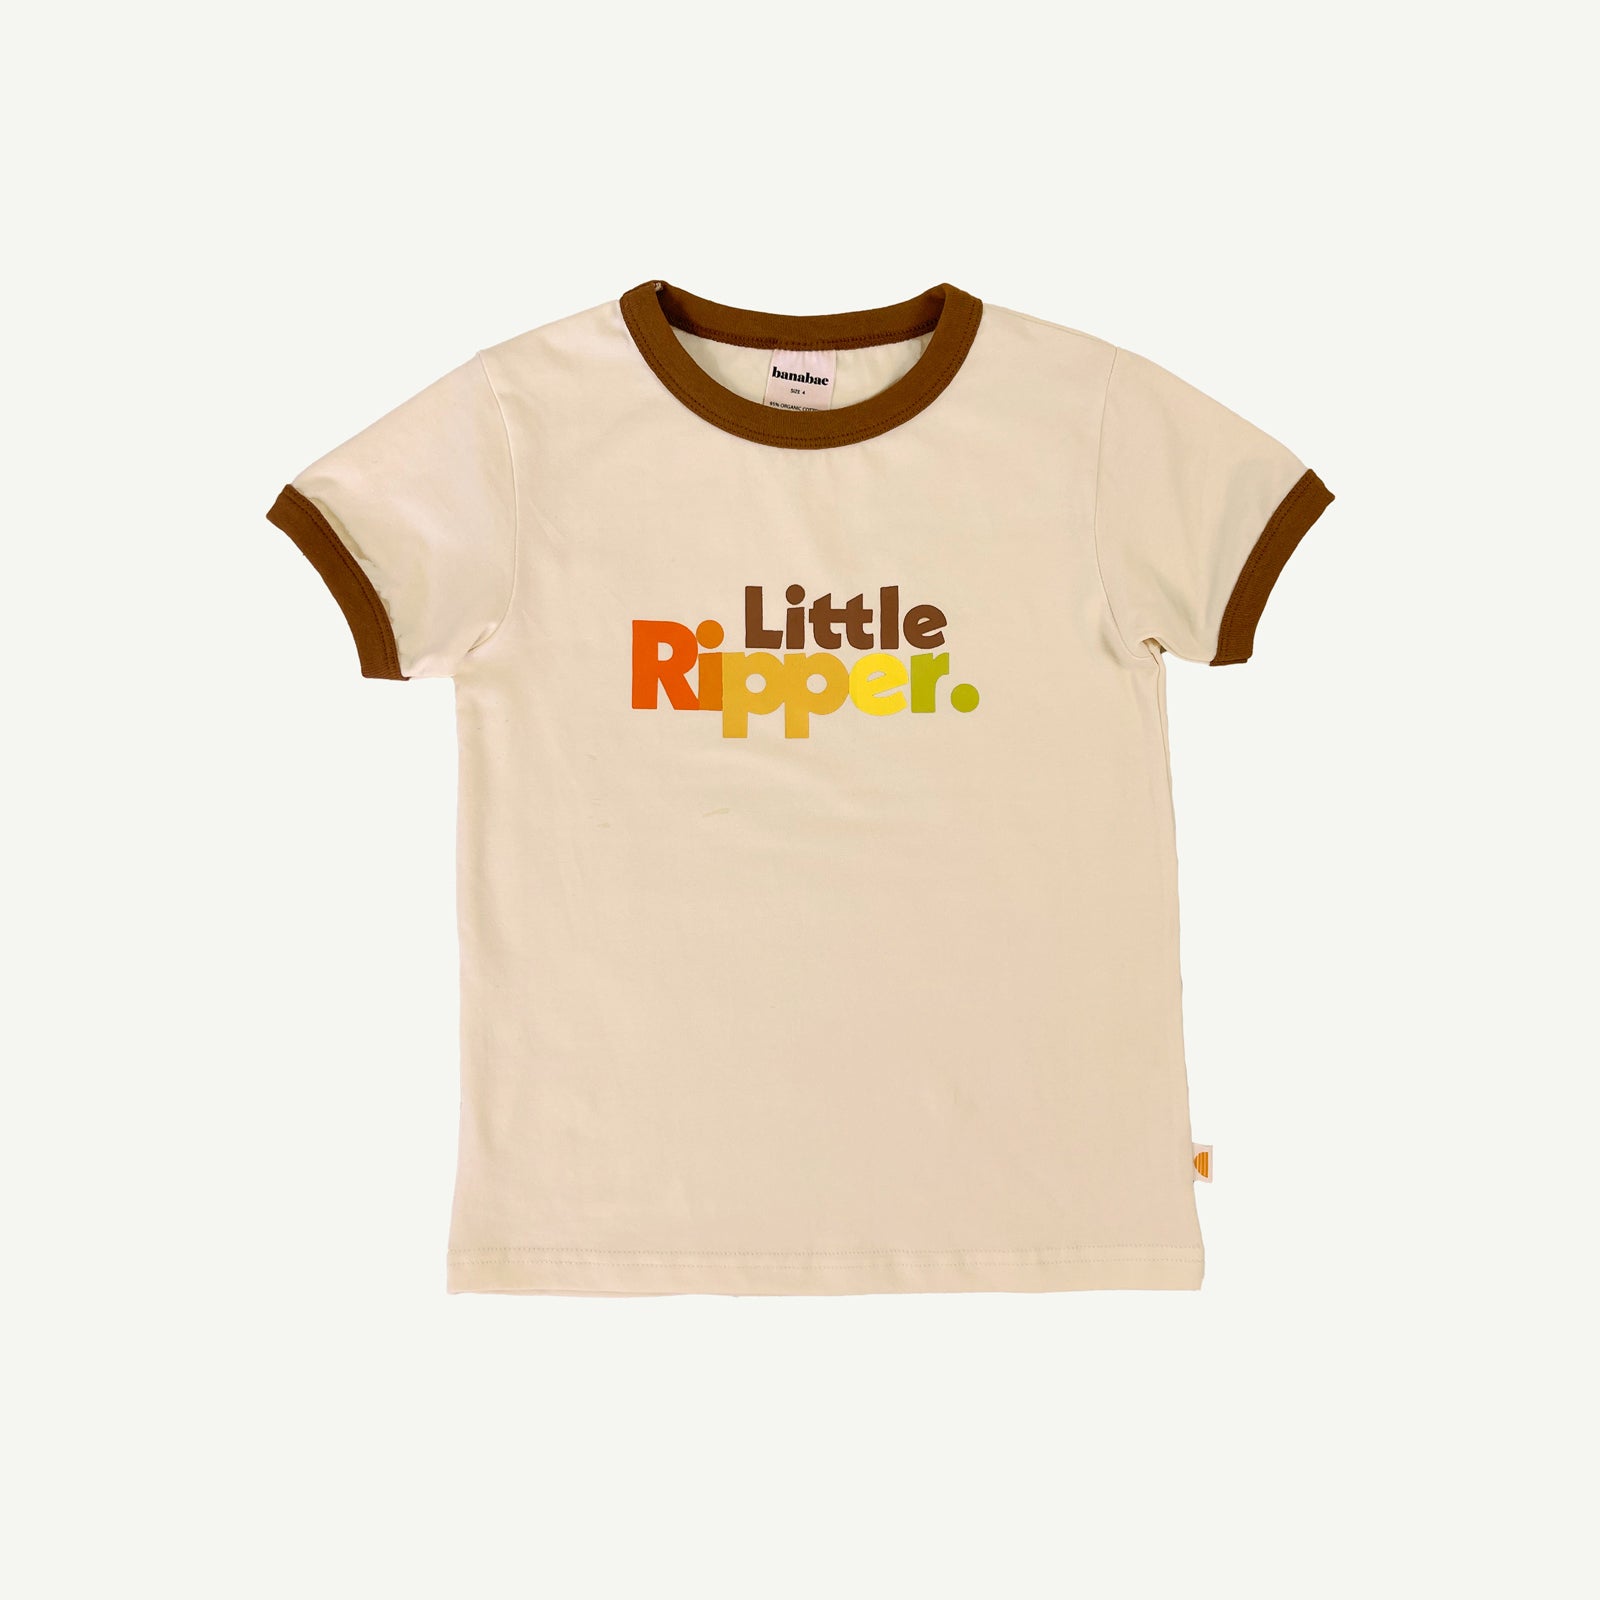 Old Mate and Little Ripper Tee Bundle